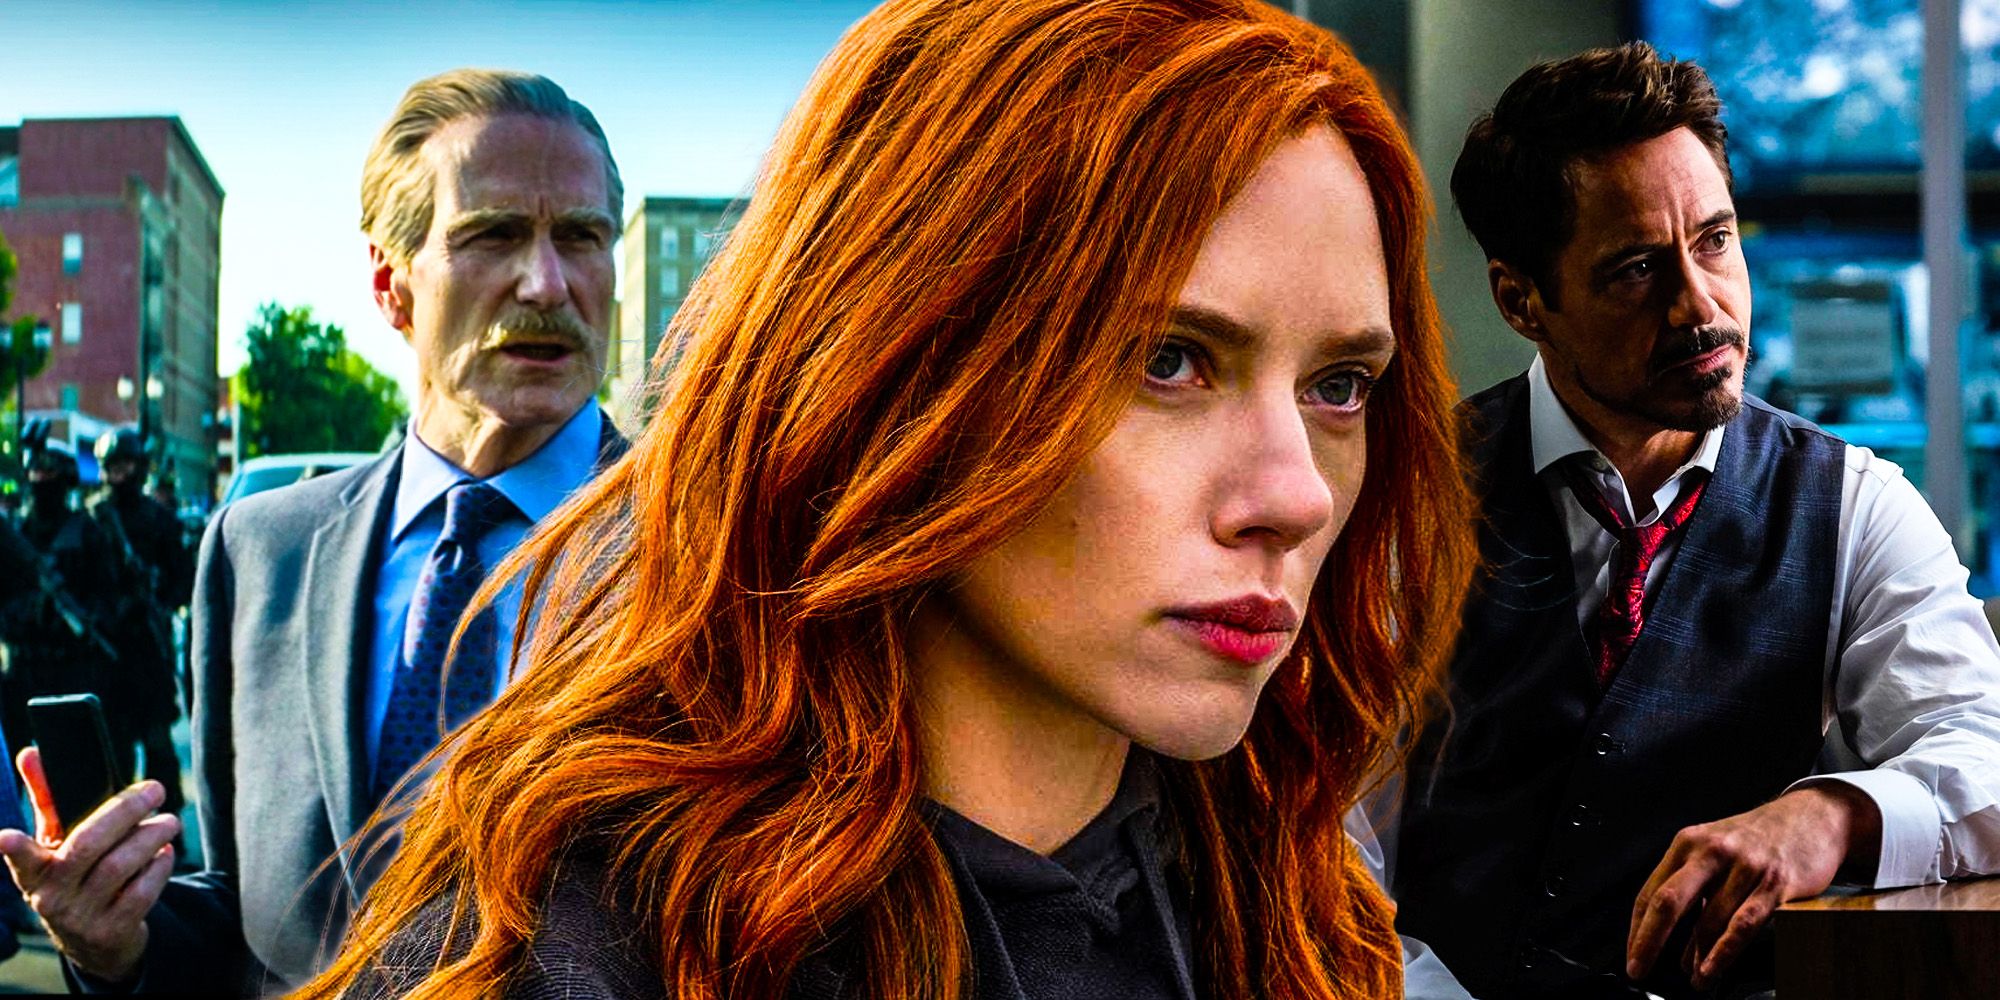 Black widow replaced Iron man Tony stark cameo with General Ross